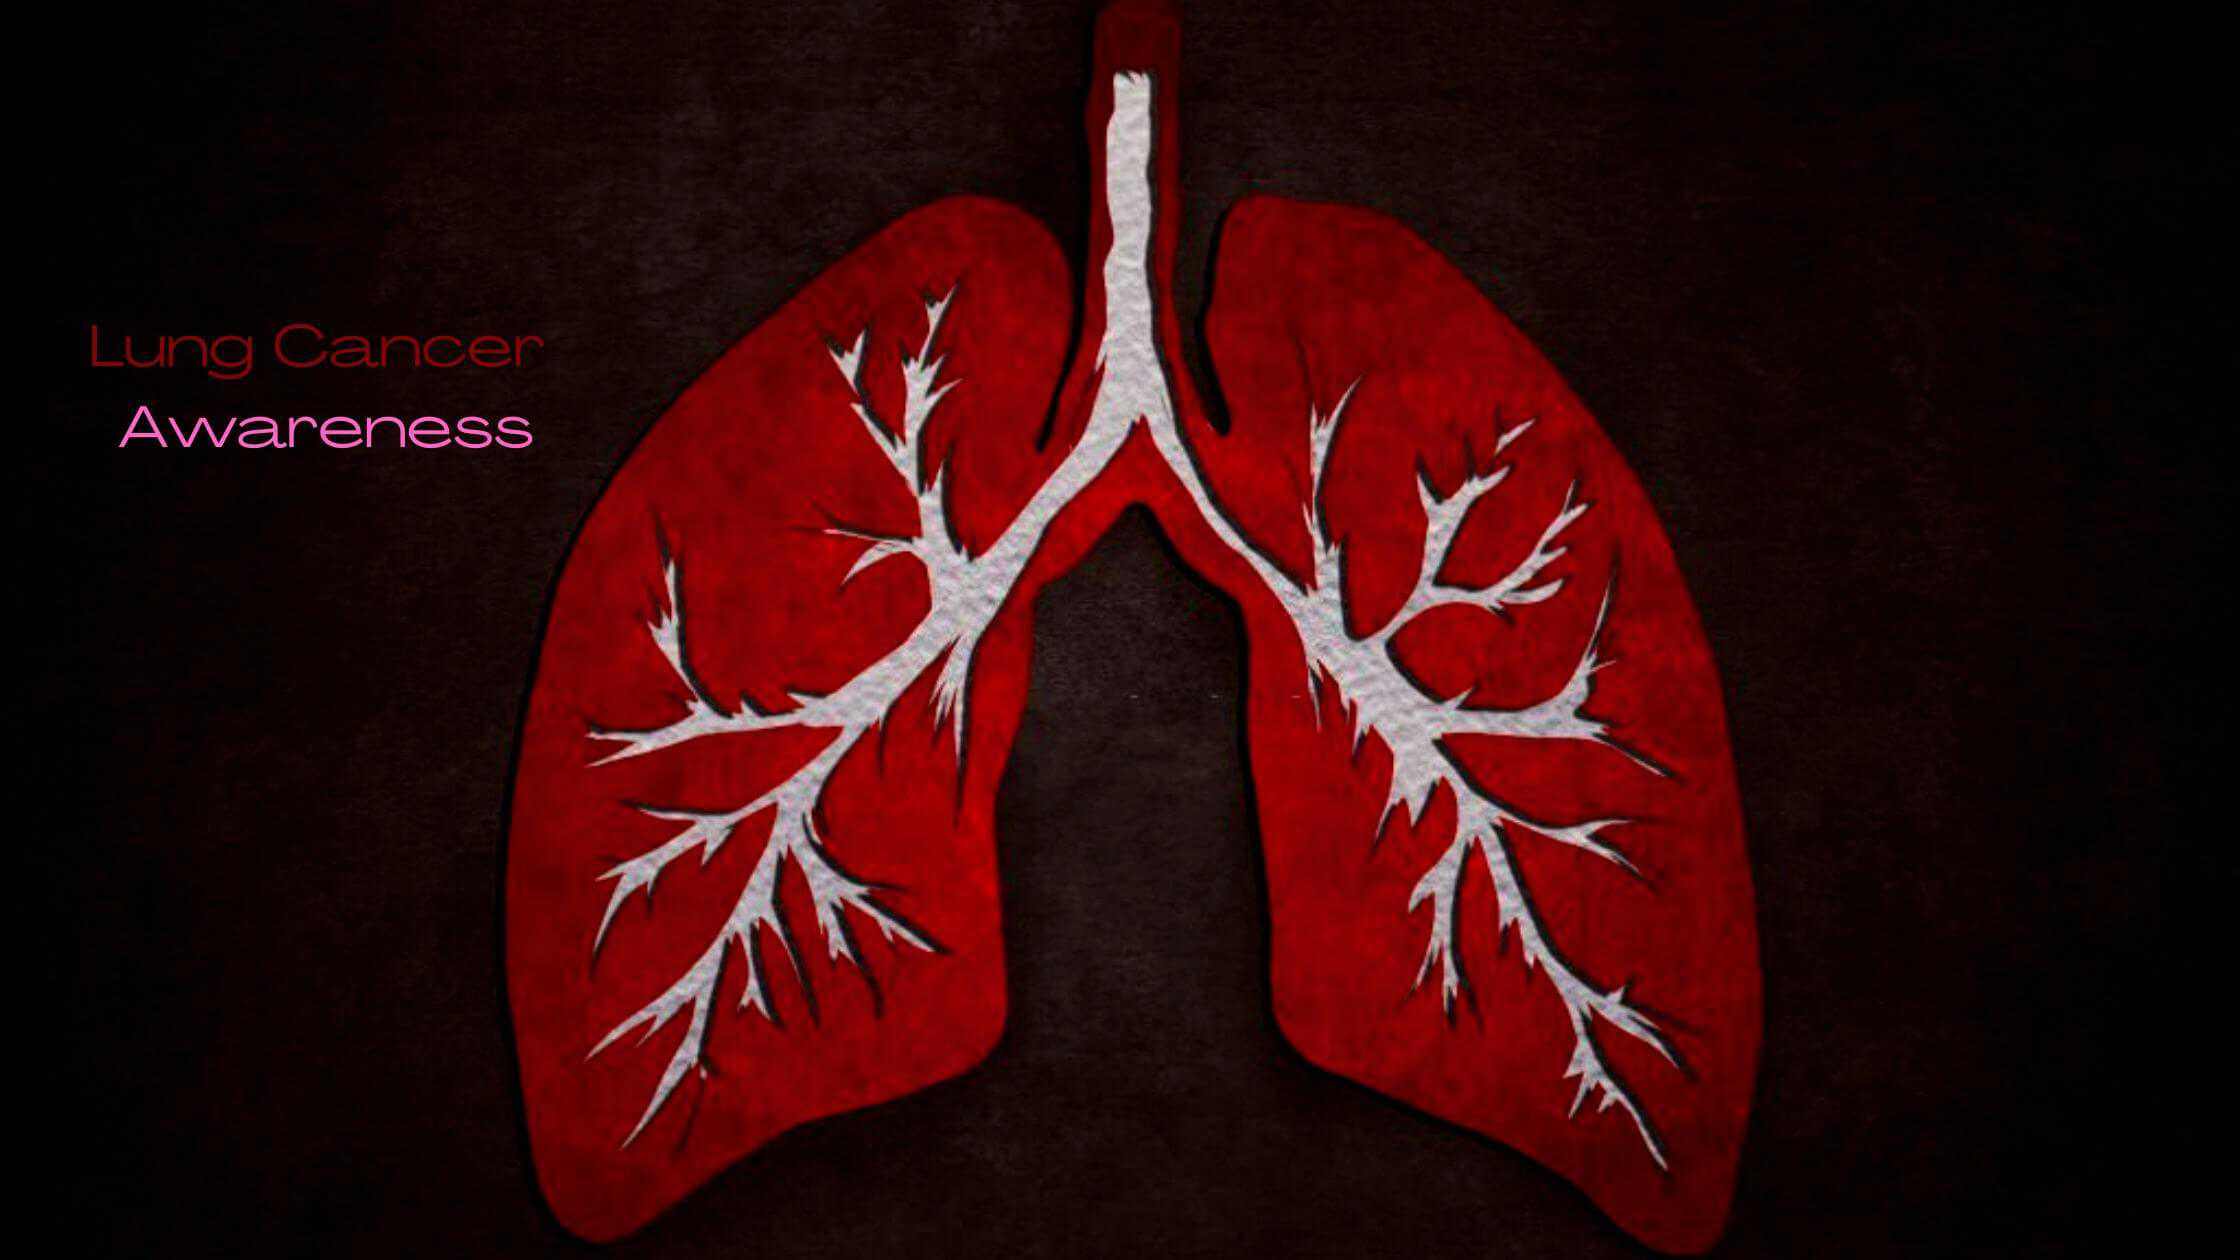 November Is Lung Cancer Awareness Month And Doctors Advise Early Screening